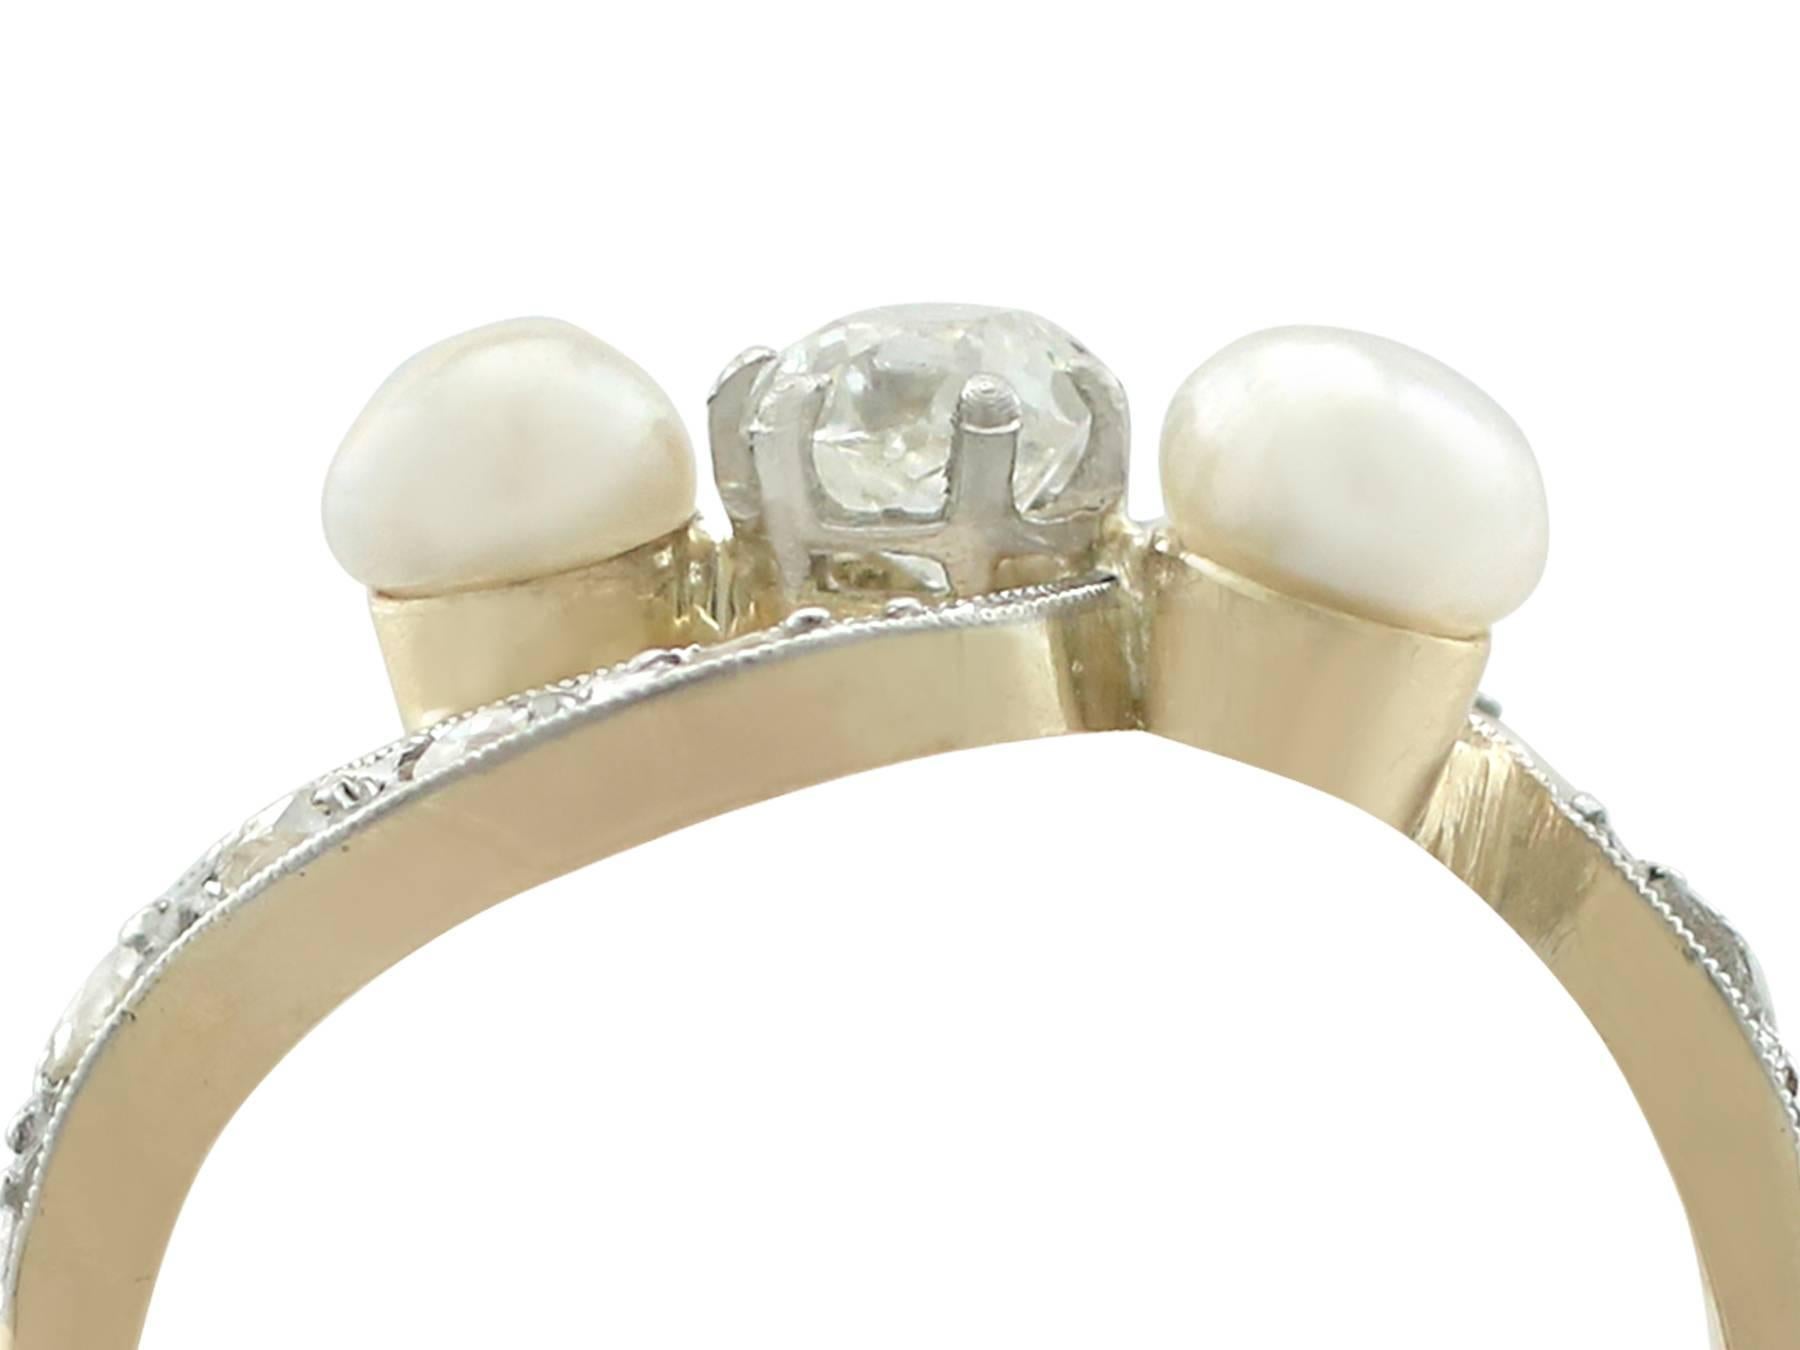 An impressive antique French seed pearl and 0.45 carat diamond, 18 karat yellow gold and 18 karat white gold set twist ring; part of our diverse antique jewellery collections.

This fine and impressive pearl and diamond twist ring has been crafted